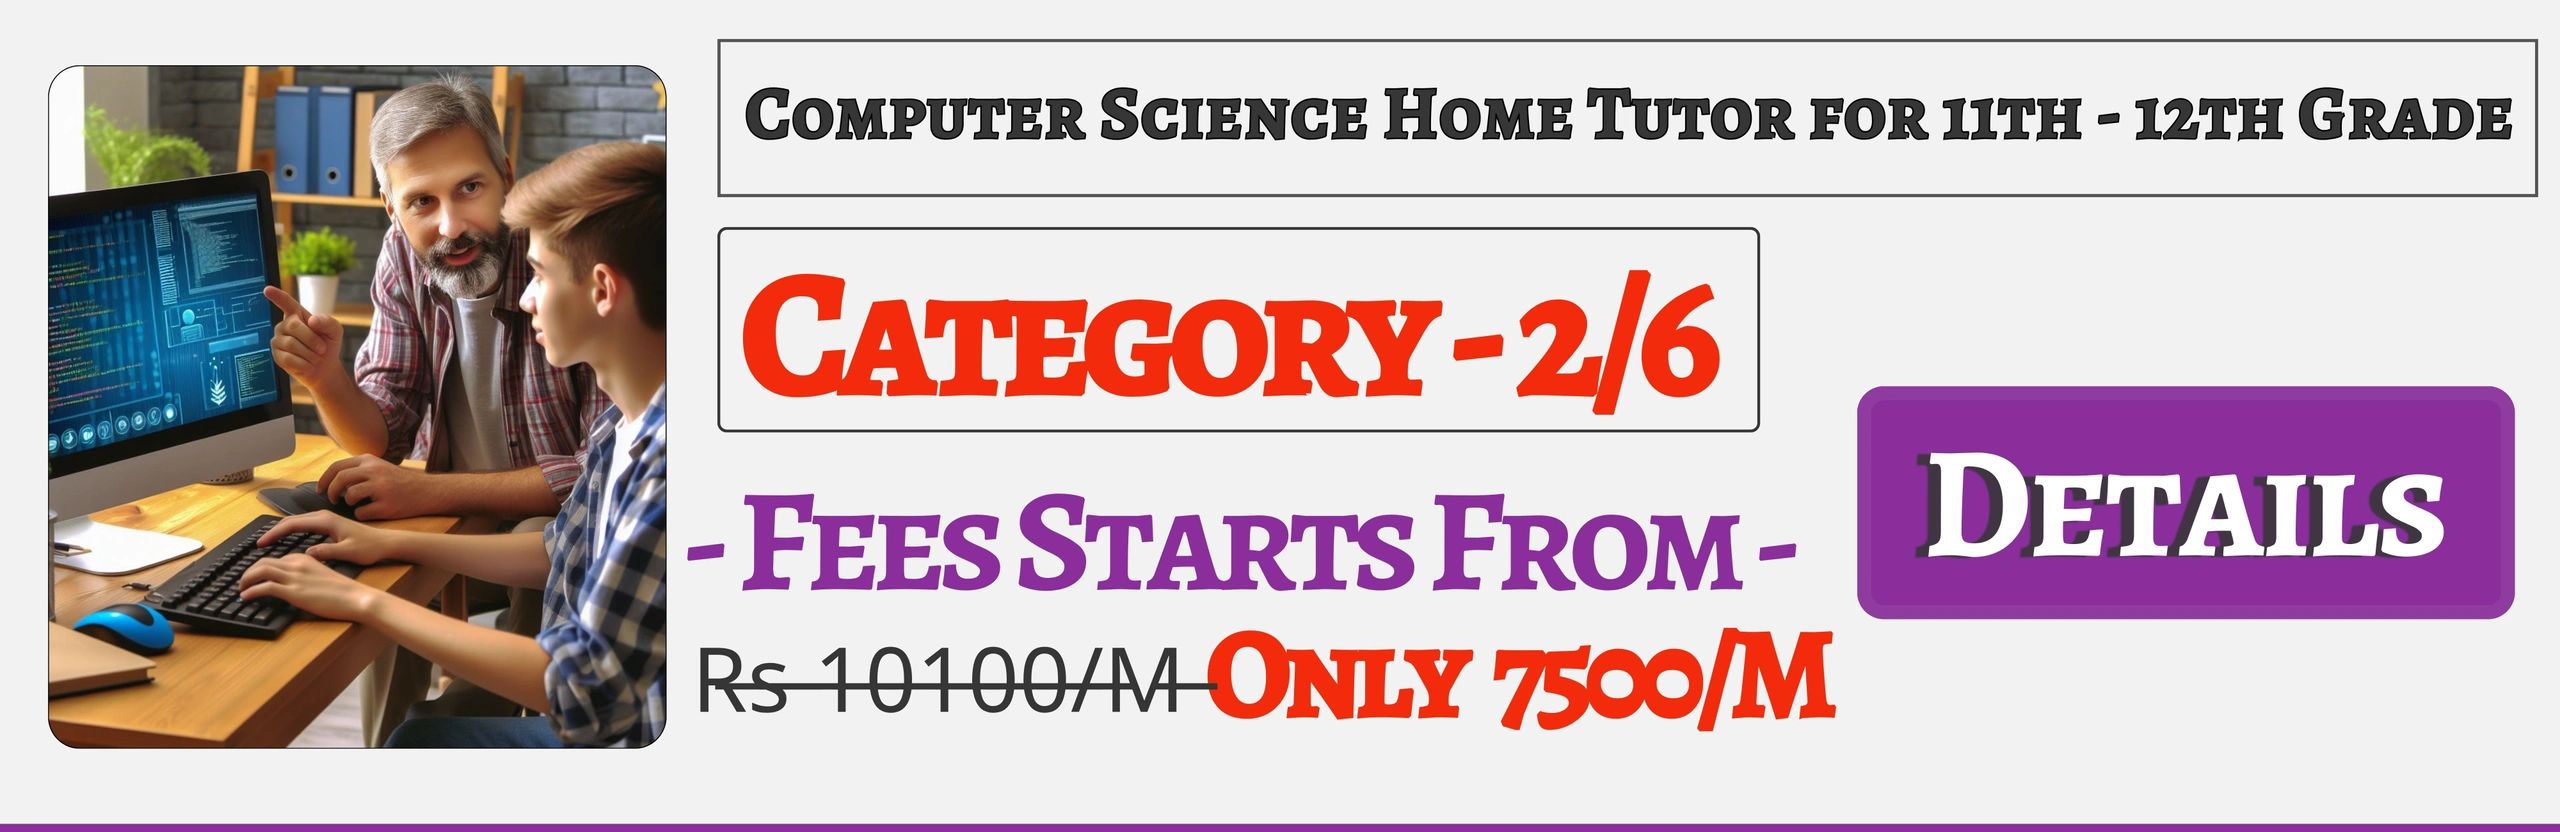 Book Best Nearby Computer Science Home Tuition Tutors For 11th & 12th In Jaipur , Fees Only 7500/M